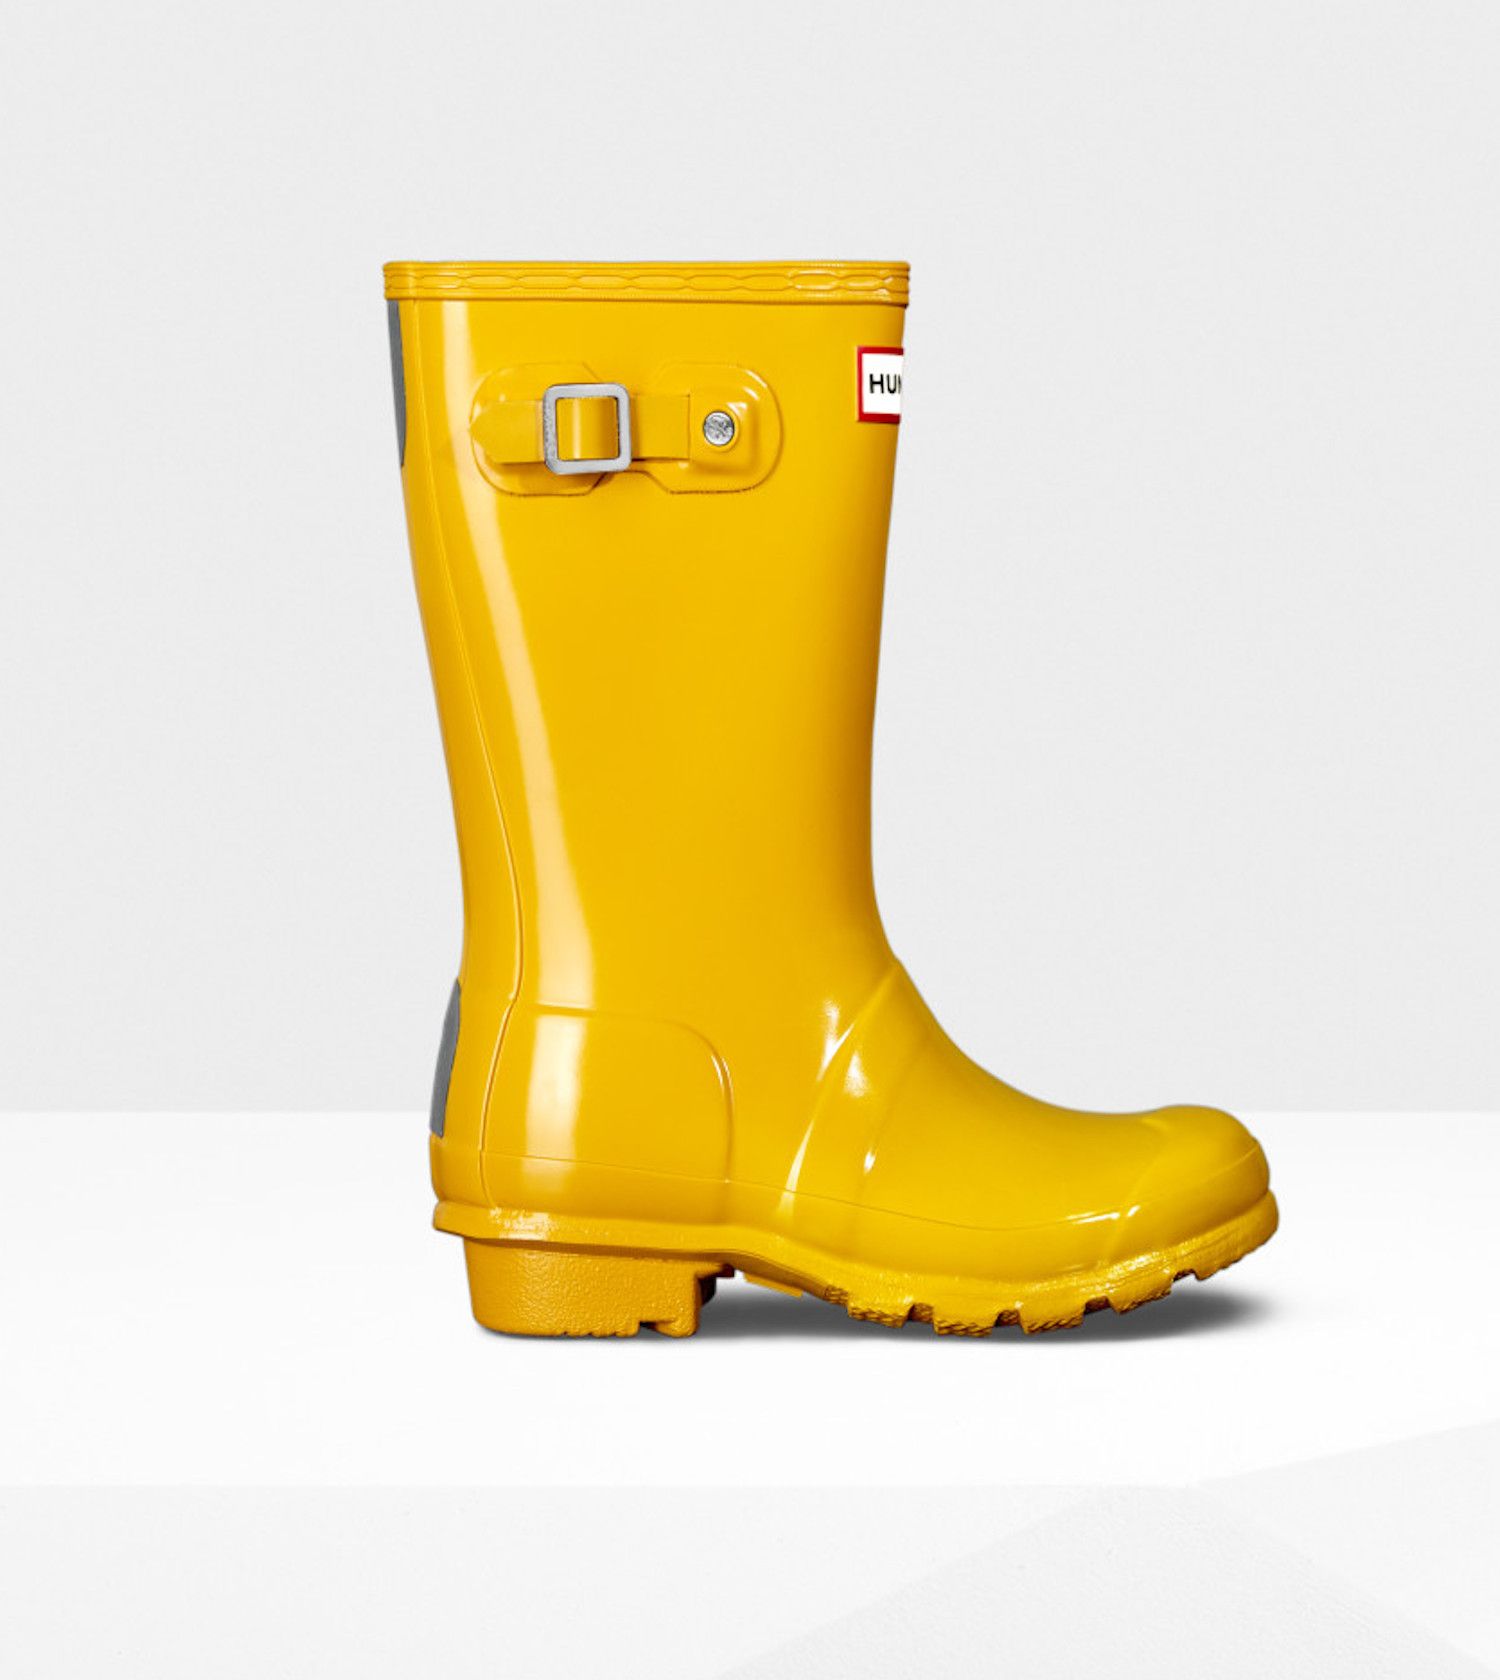 Buy > marks and spencer wellington boots > in stock